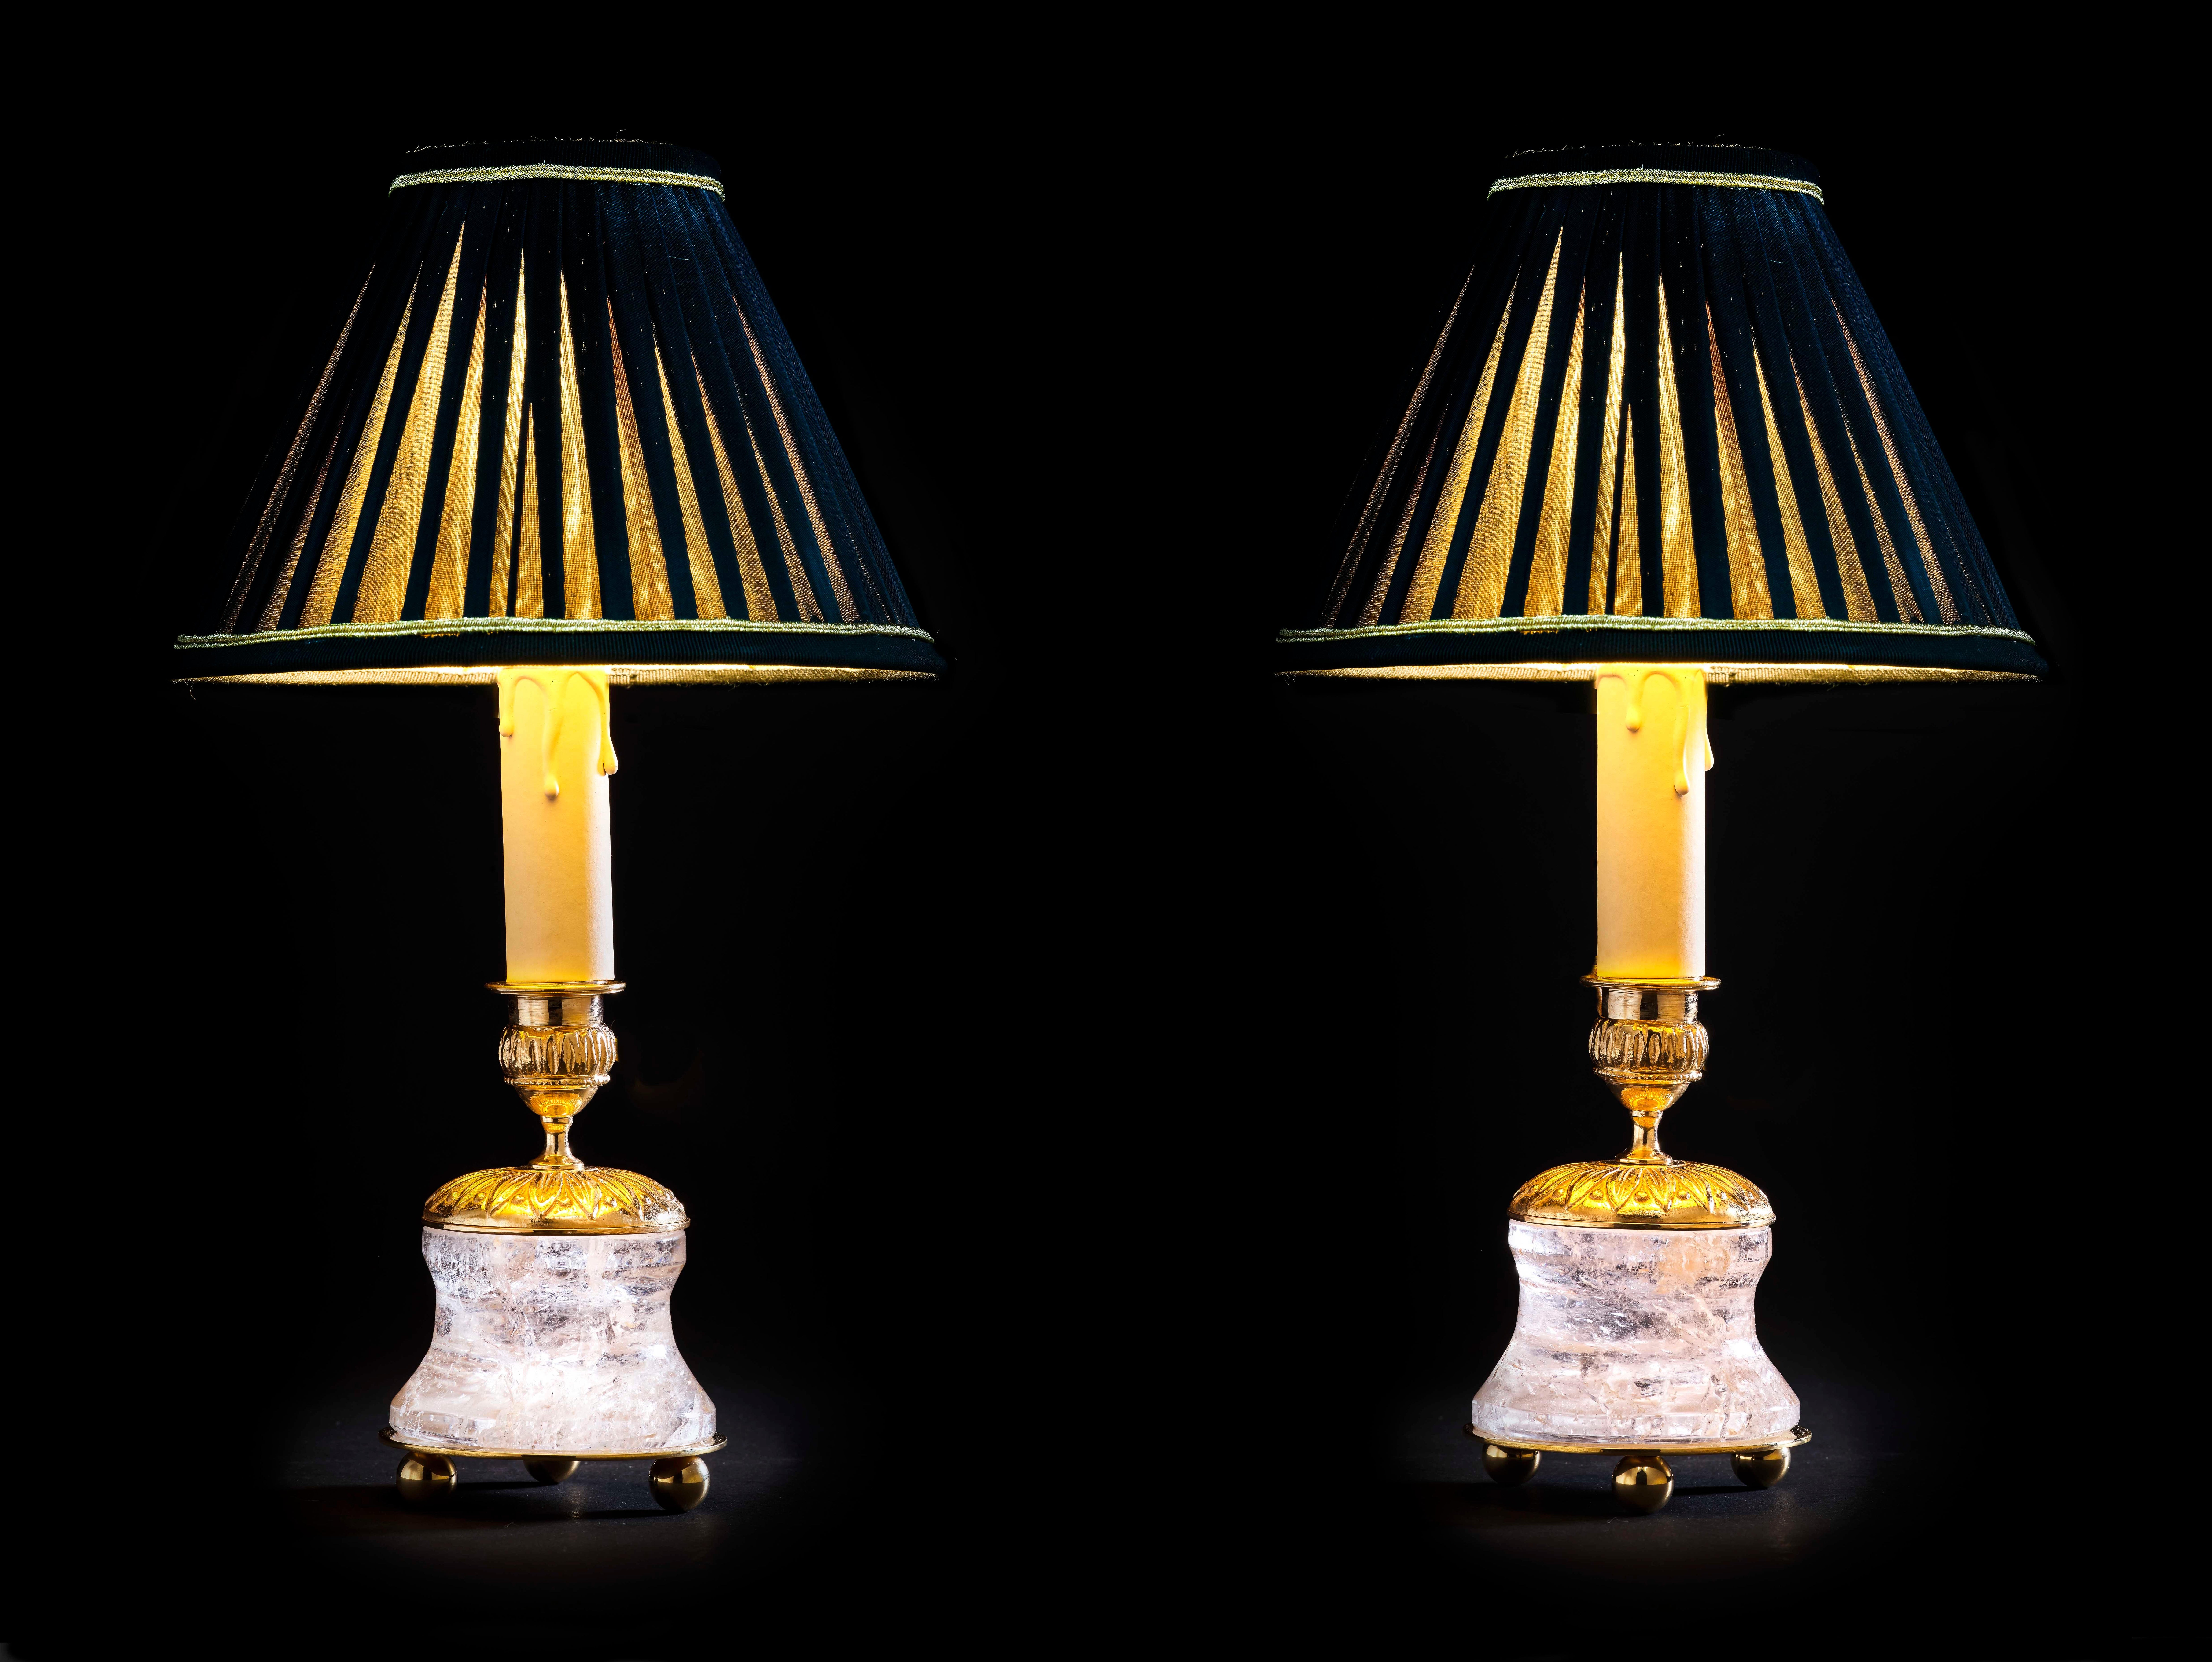 Rock crystal French First Empire style 24-karat ormolu gilding bronze black lampshades made by Alexandre Vossion.
This model can be also used as candlesticks to make your dining table so chic...

Model IV of four different models.
Handmade in